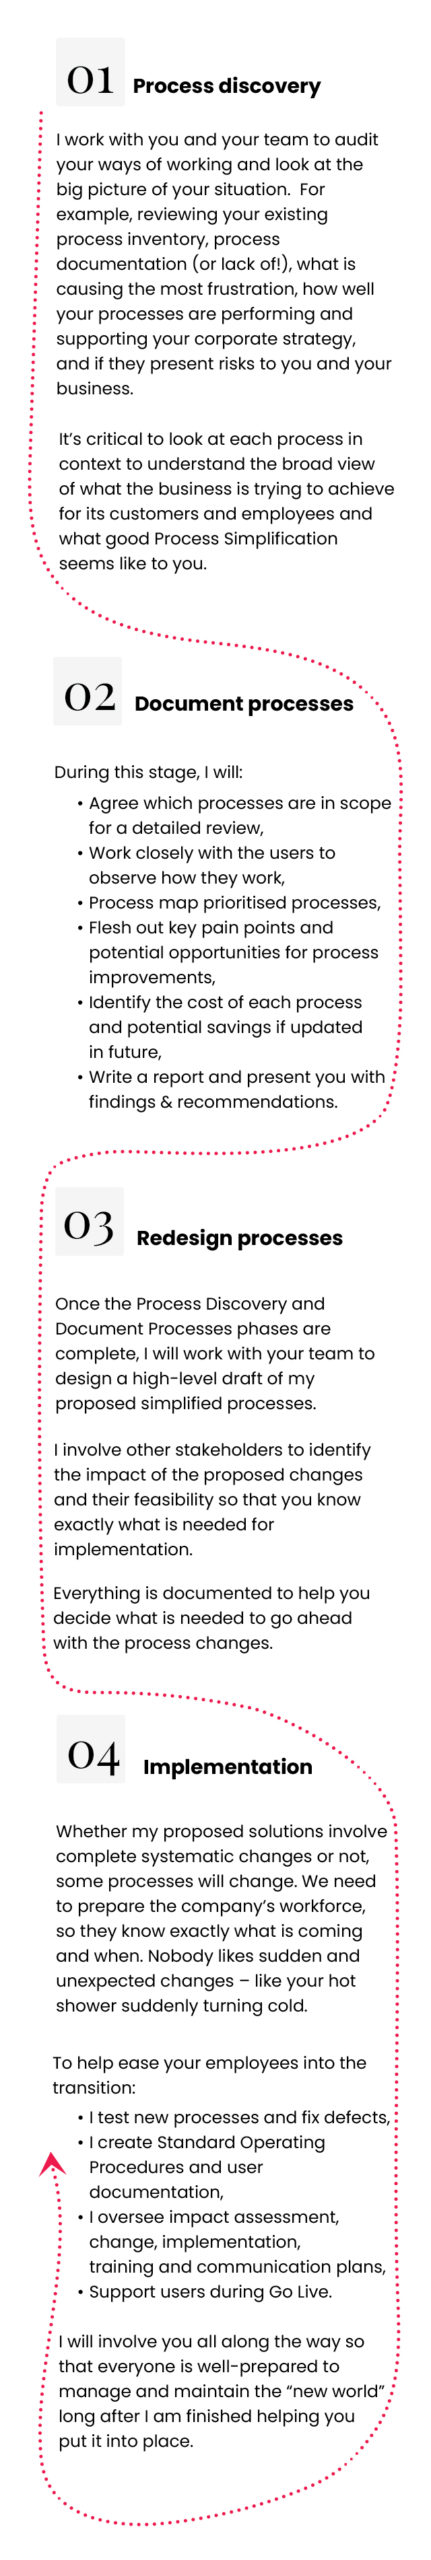 Work with me process steps for mobile version